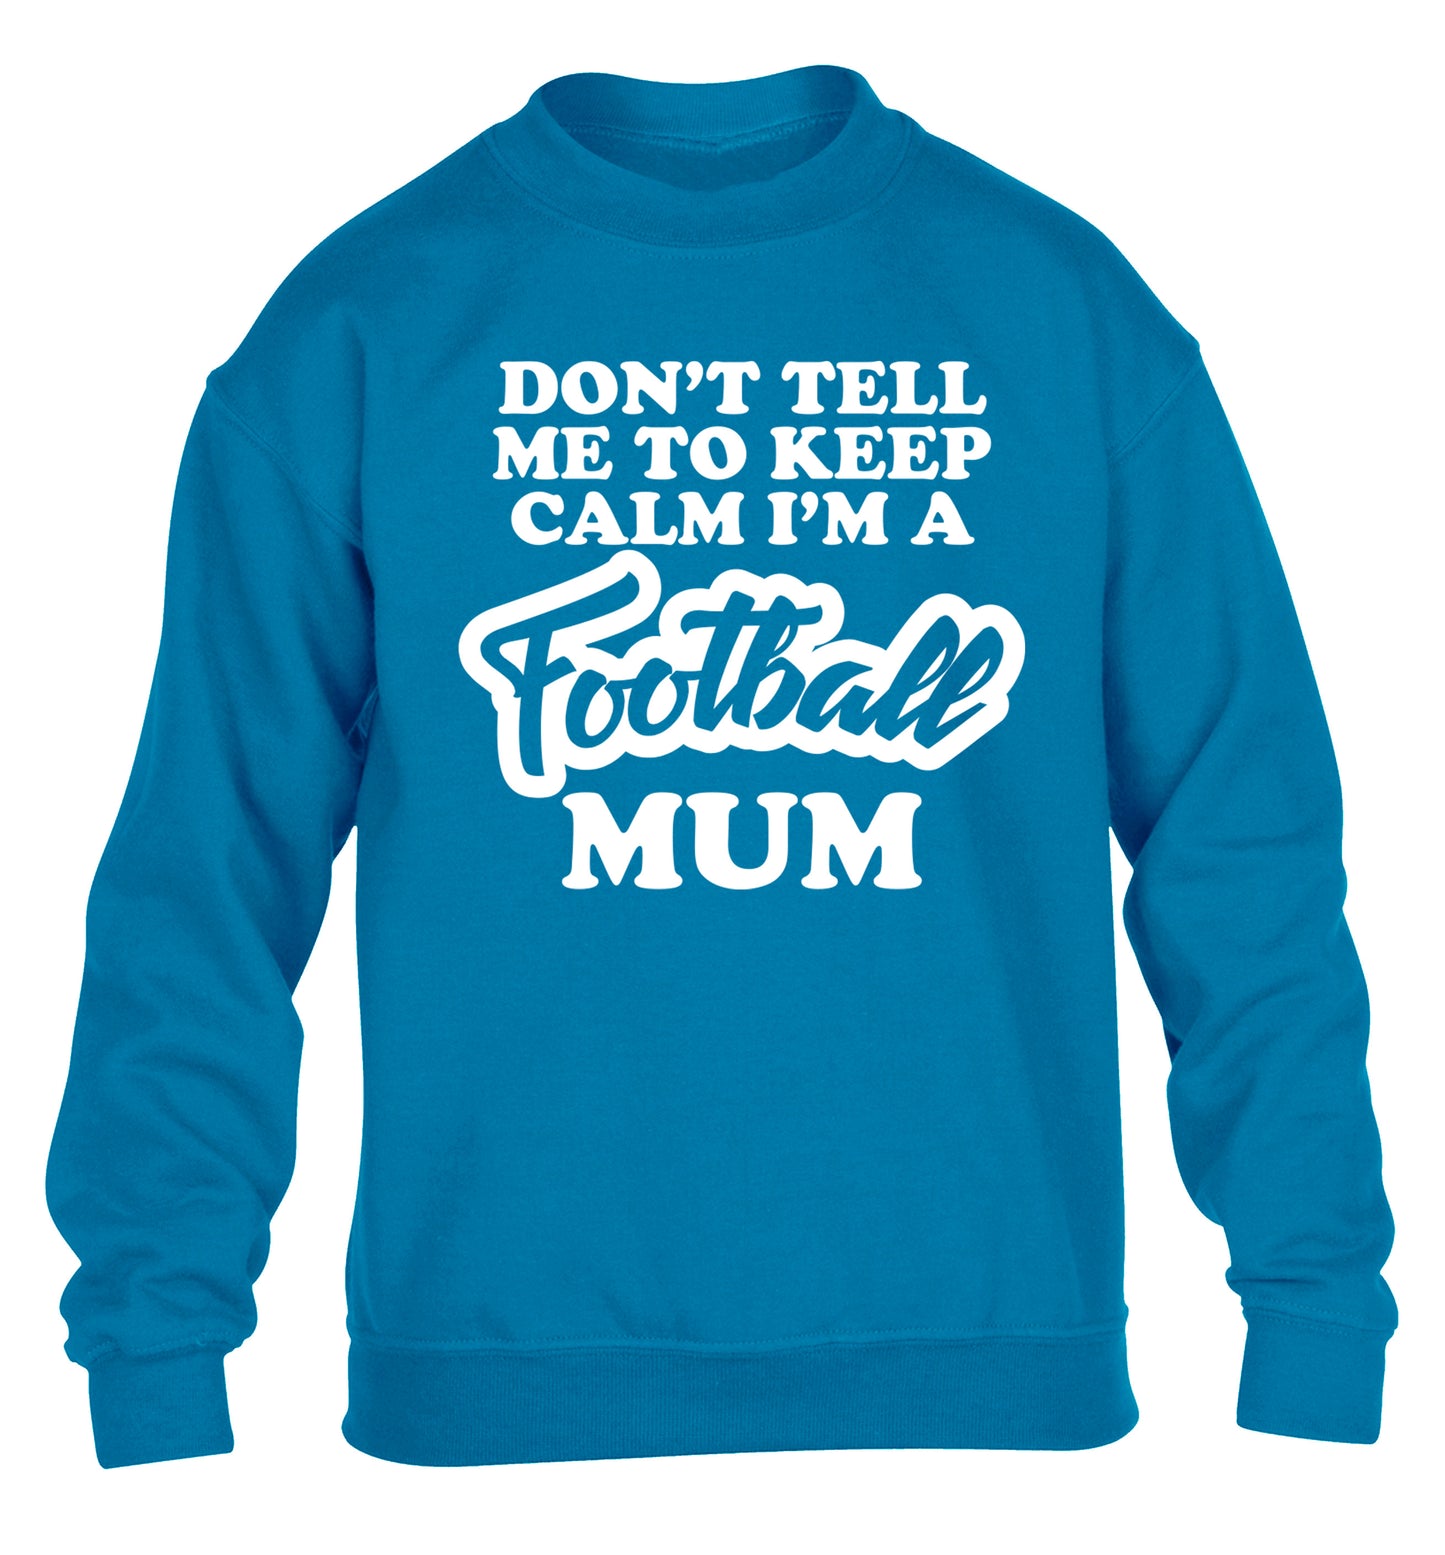 Don't tell me to keep calm I'm a football mum children's blue sweater 12-14 Years